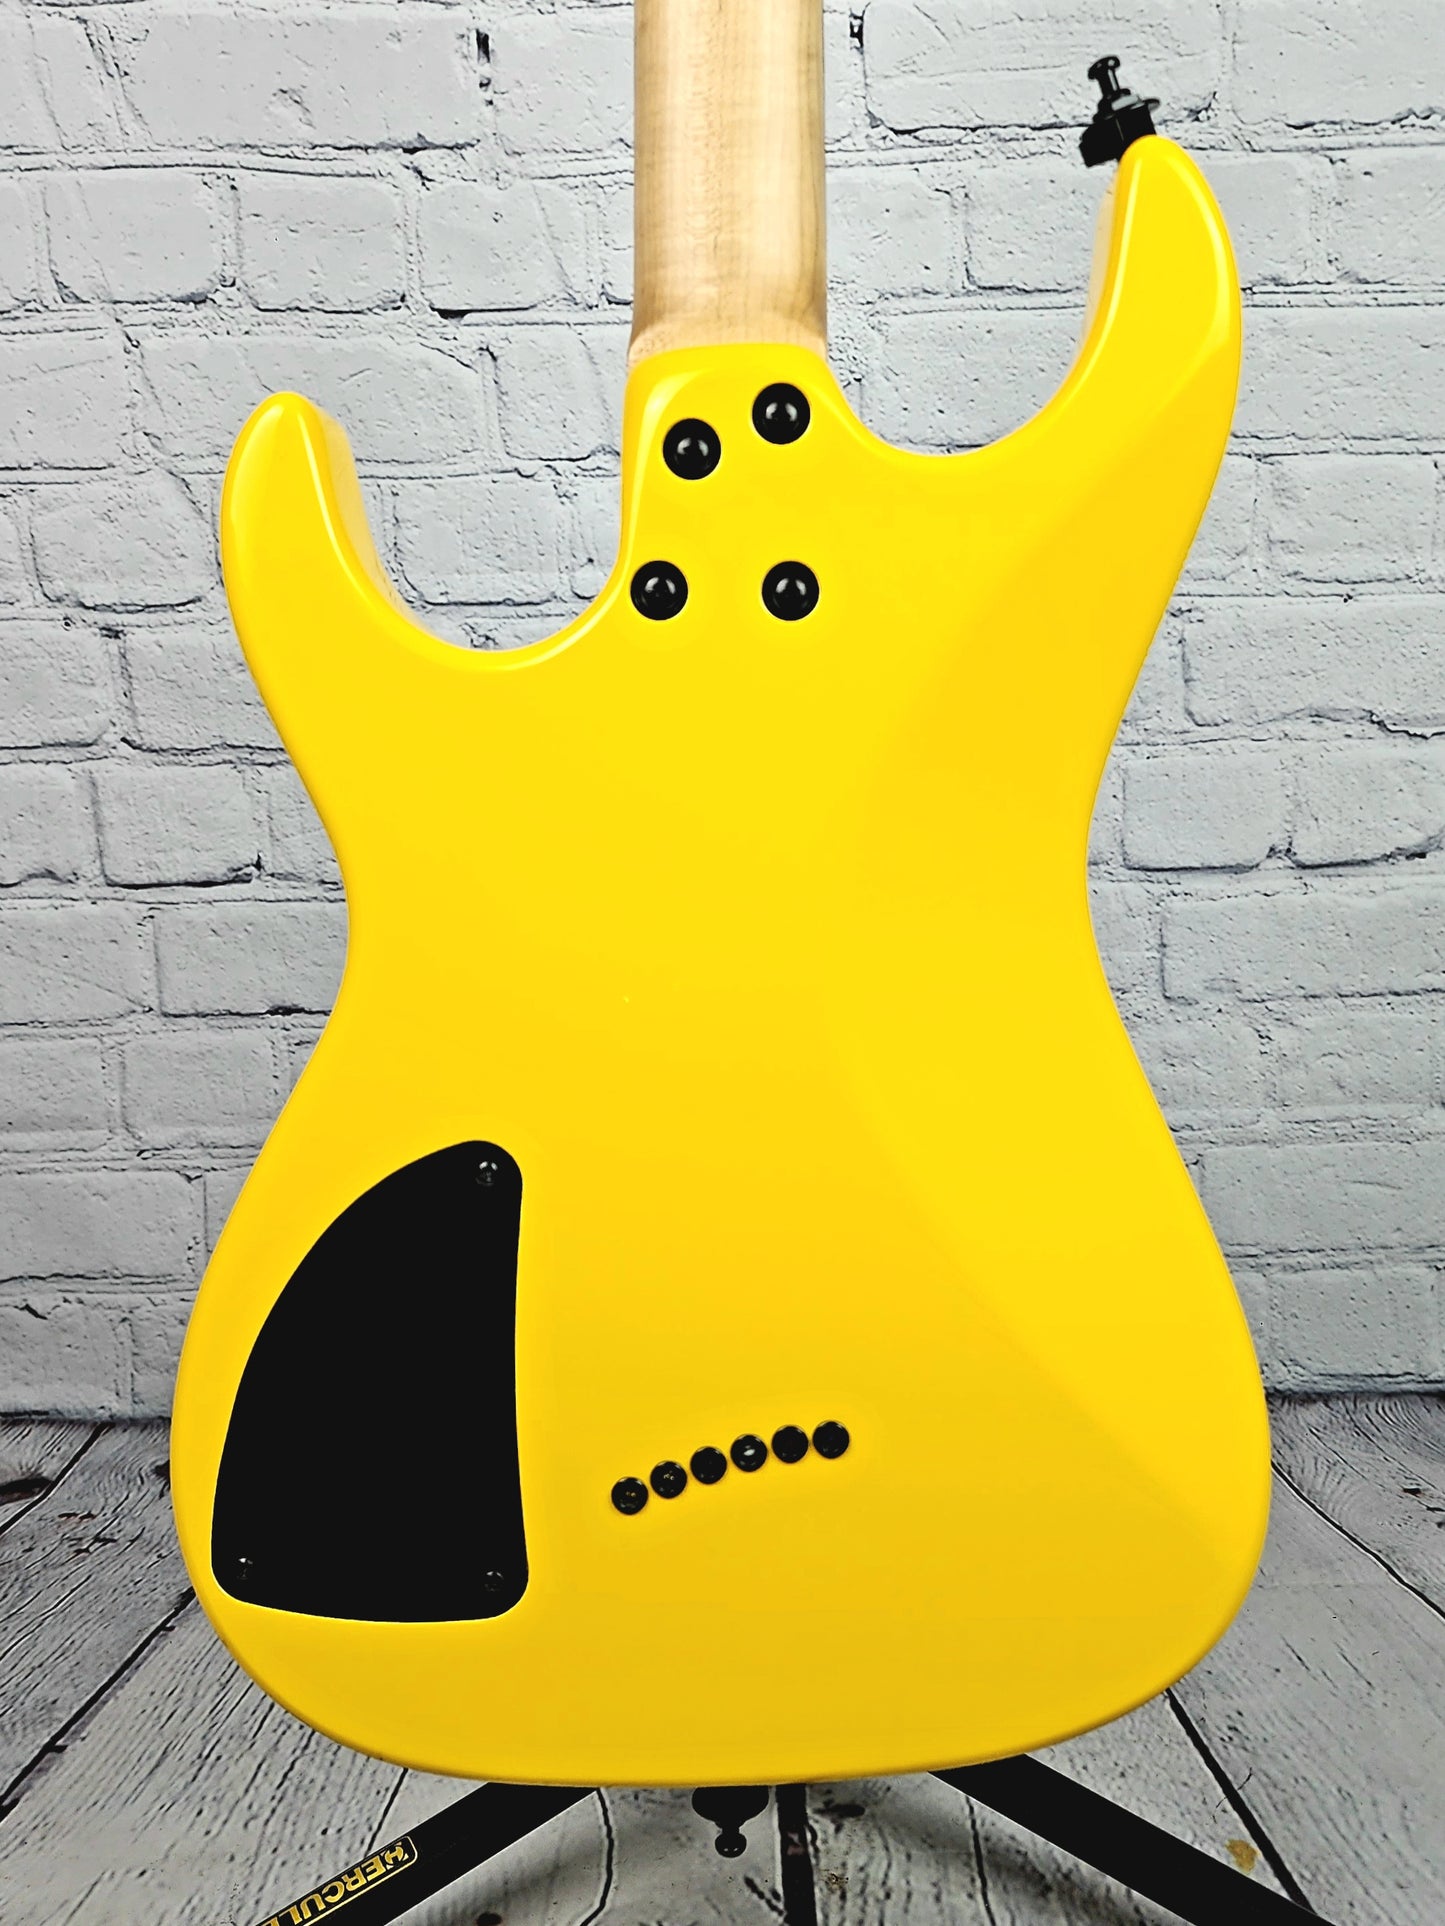 MacPherson Guitars The Rogue Electric Guitar Gloss 80s Yellow Made in Canada